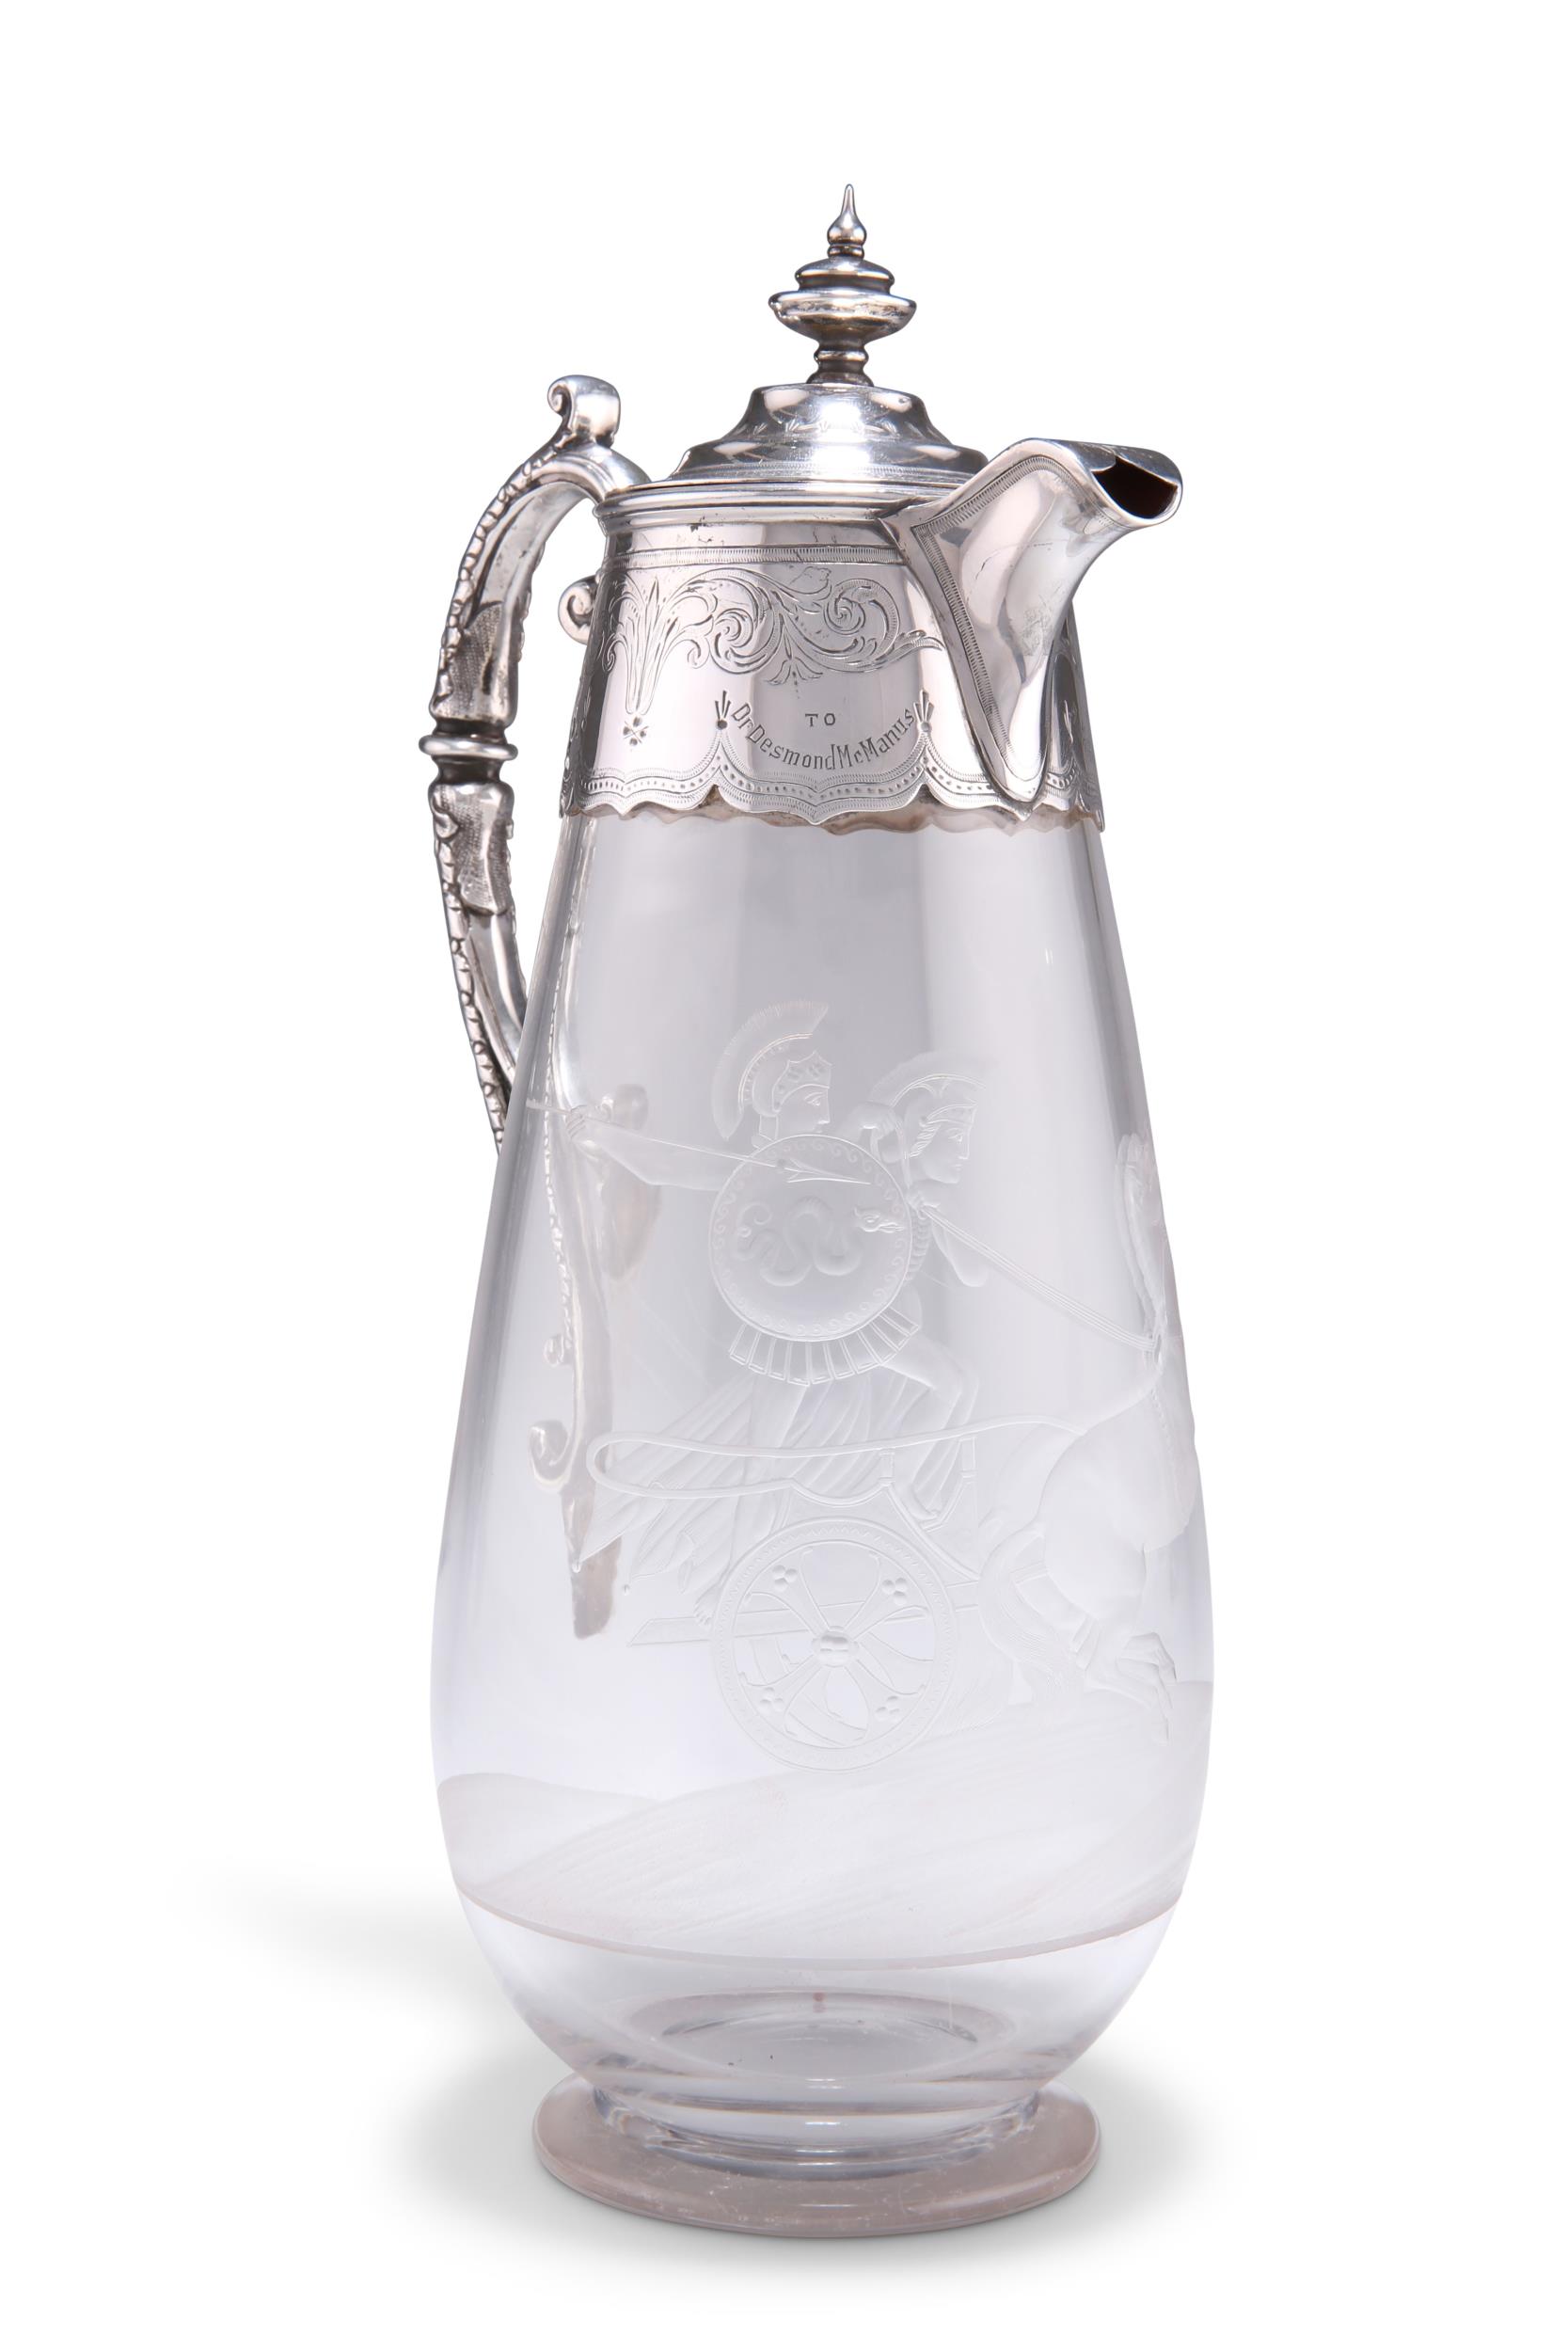 A FINE VICTORIAN SILVER-MOUNTED CLARET JUG - Image 2 of 10